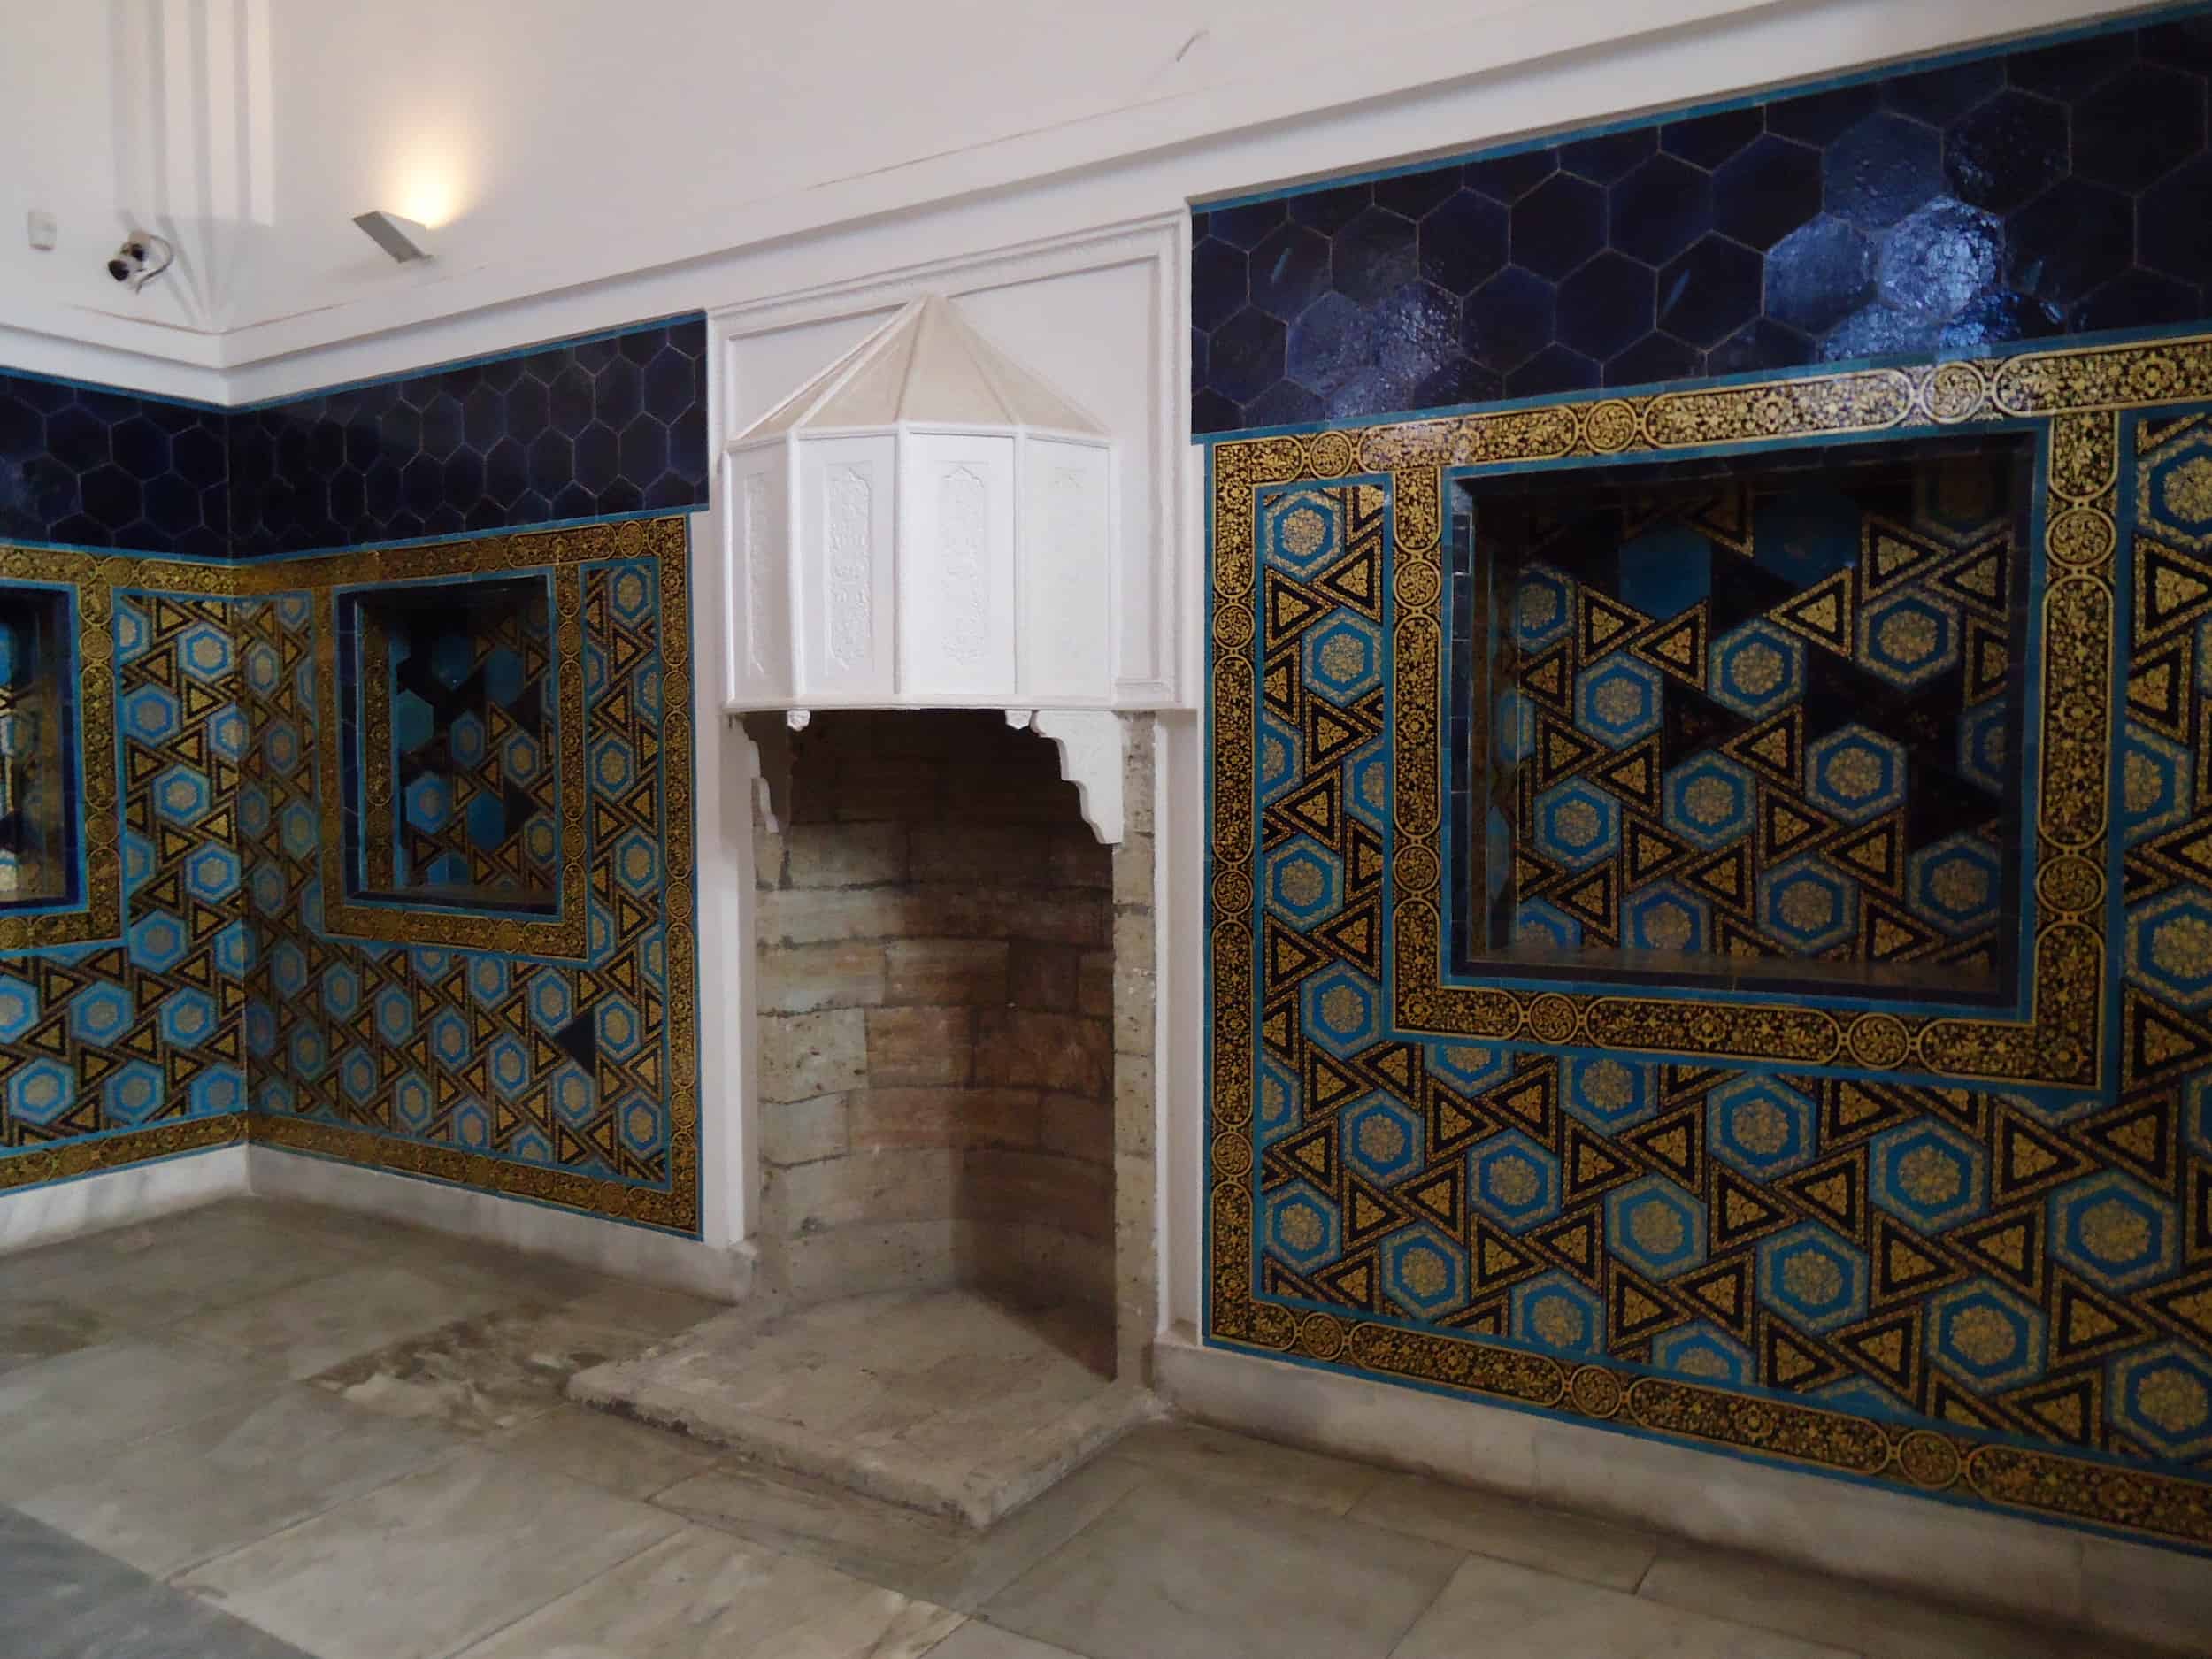 Fireplace and tiled walls at the Tiled Kiosk